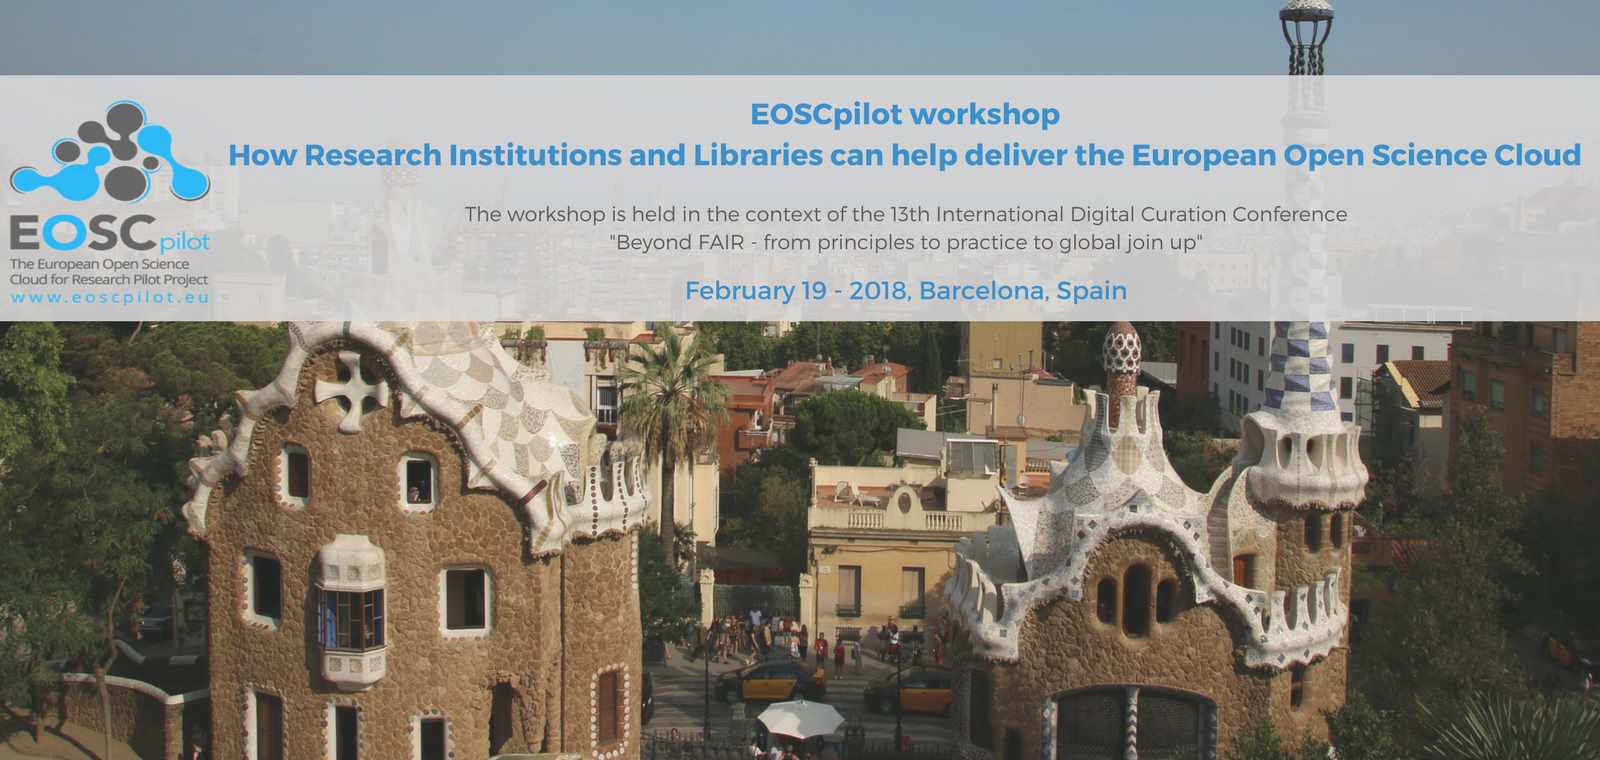 How Research Institutions and Libraries can help deliver the European Open Science Cloud